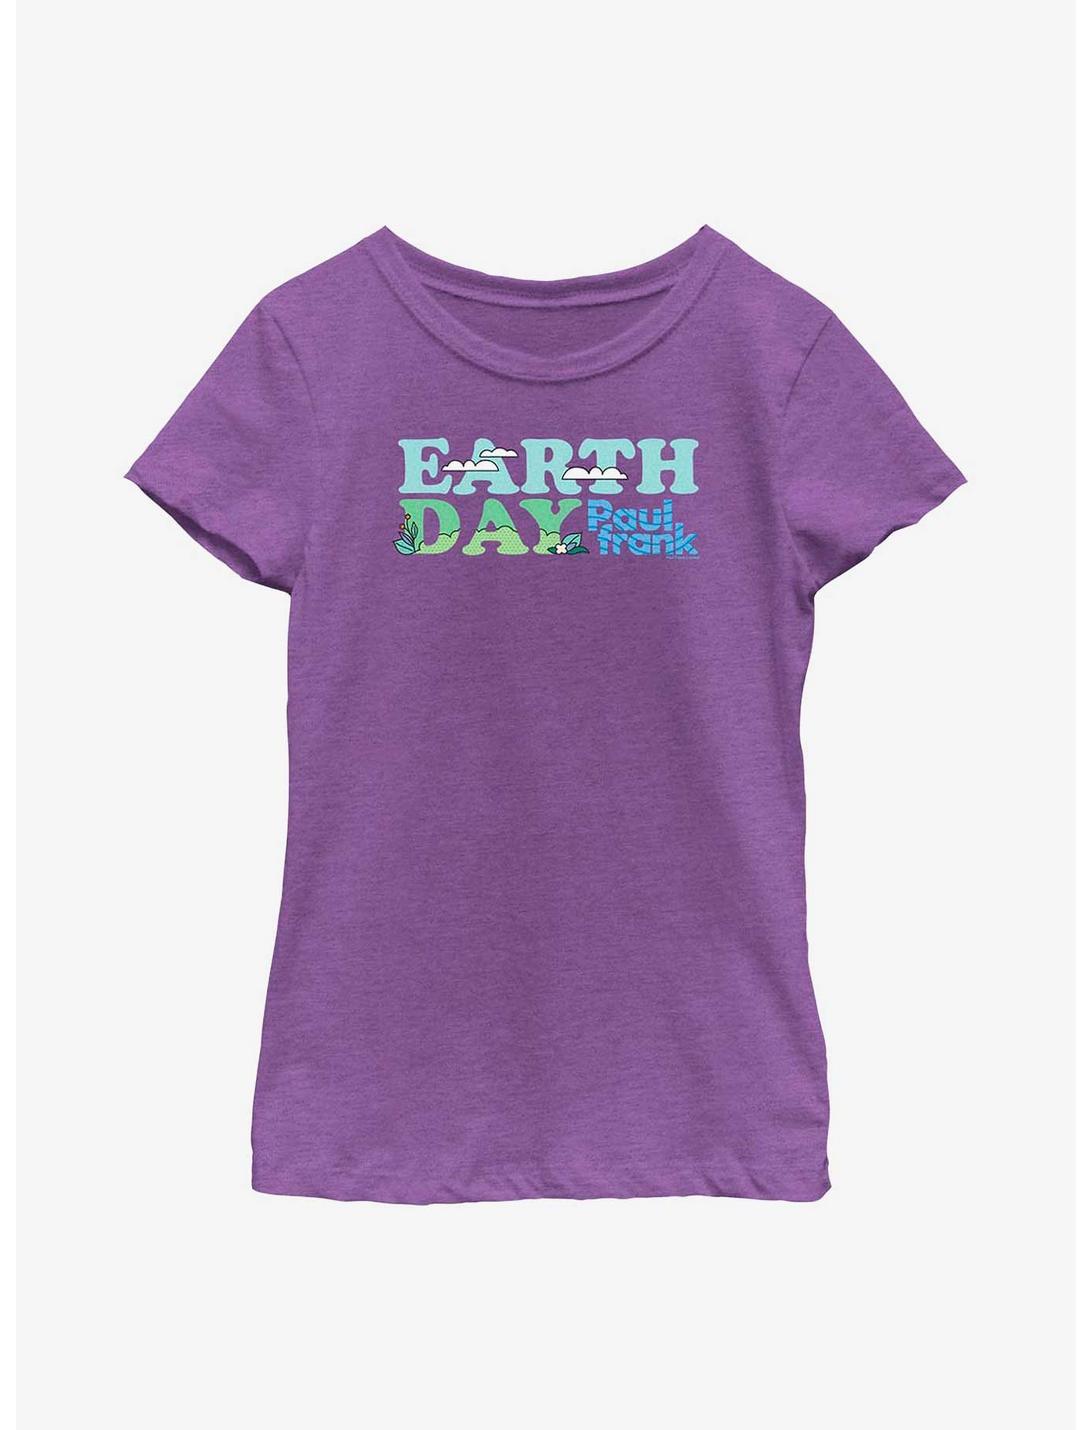 Paul Frank Earth Day Youth Girls T-Shirt, PURPLE BERRY, hi-res